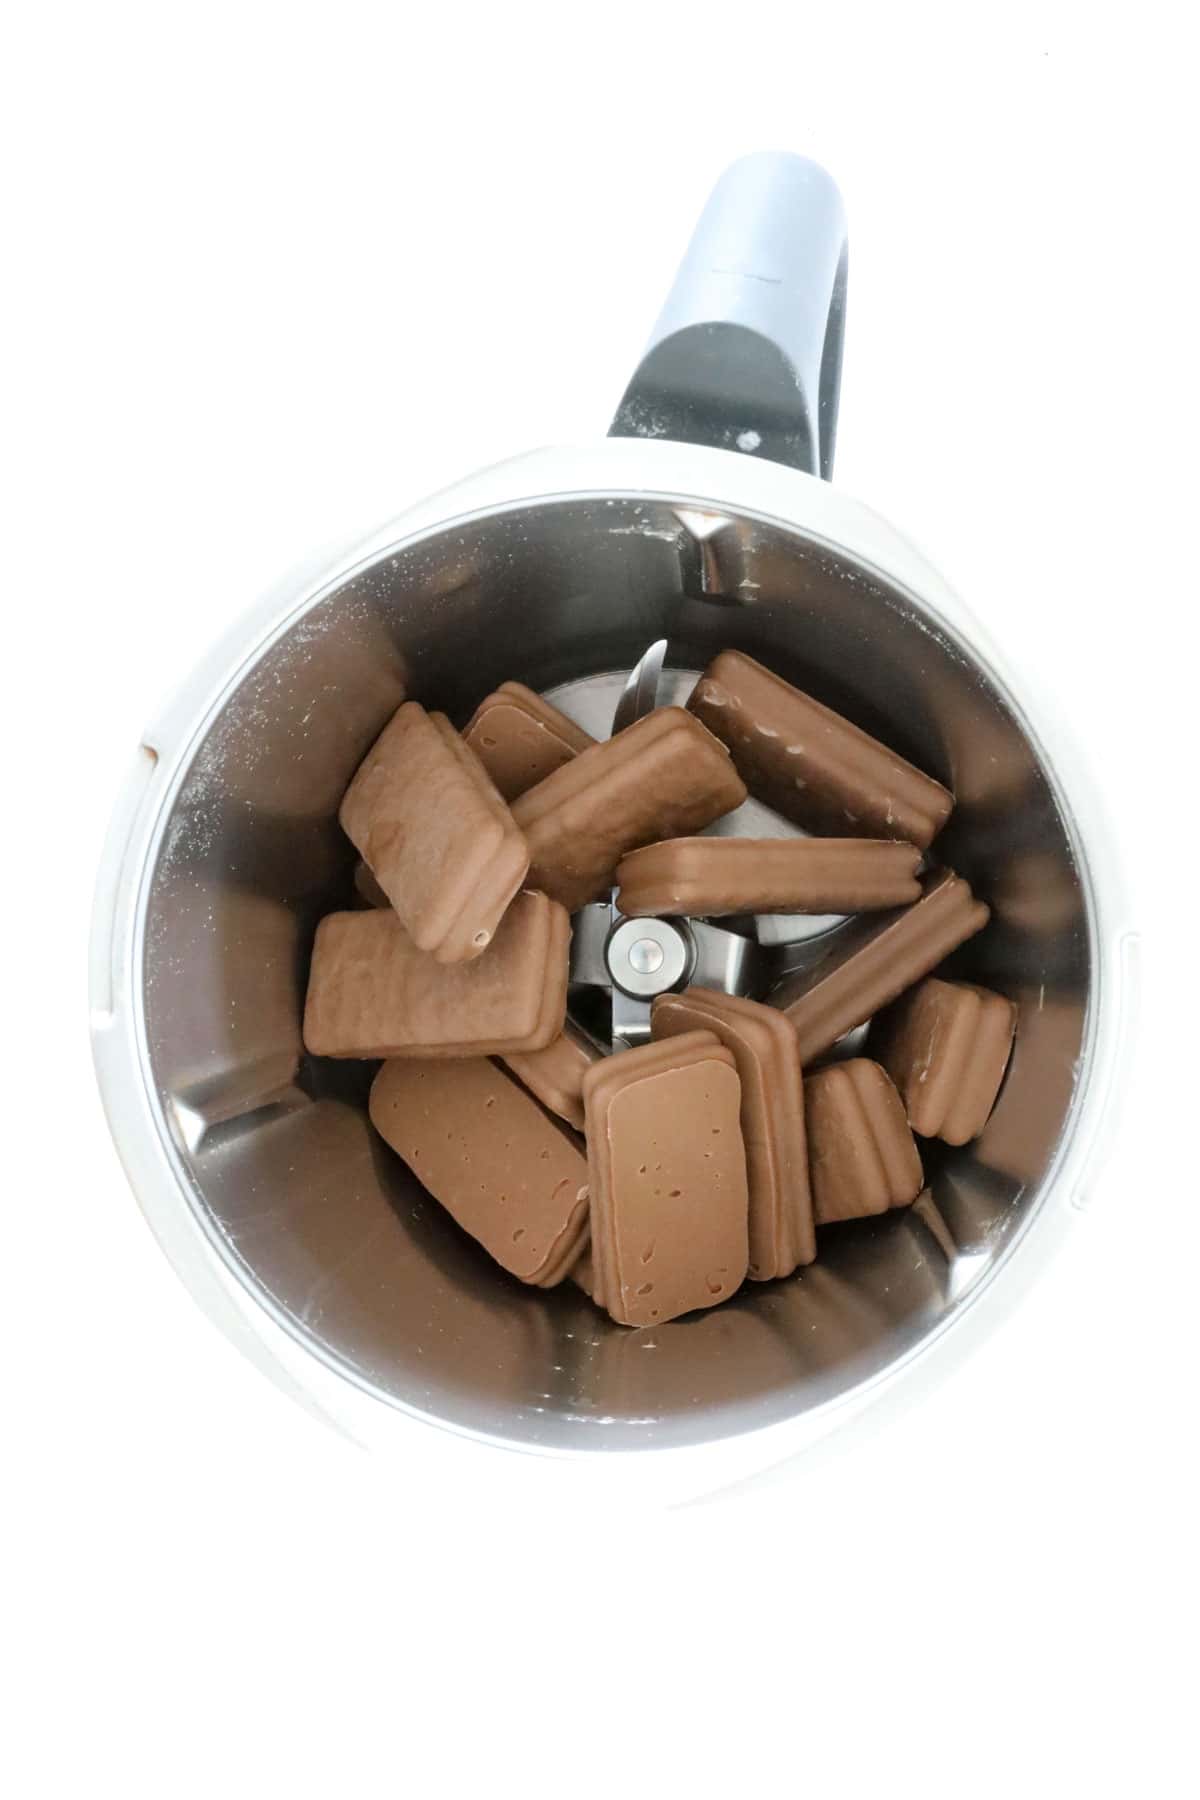 Tim Tam biscuits in a Thermomix.